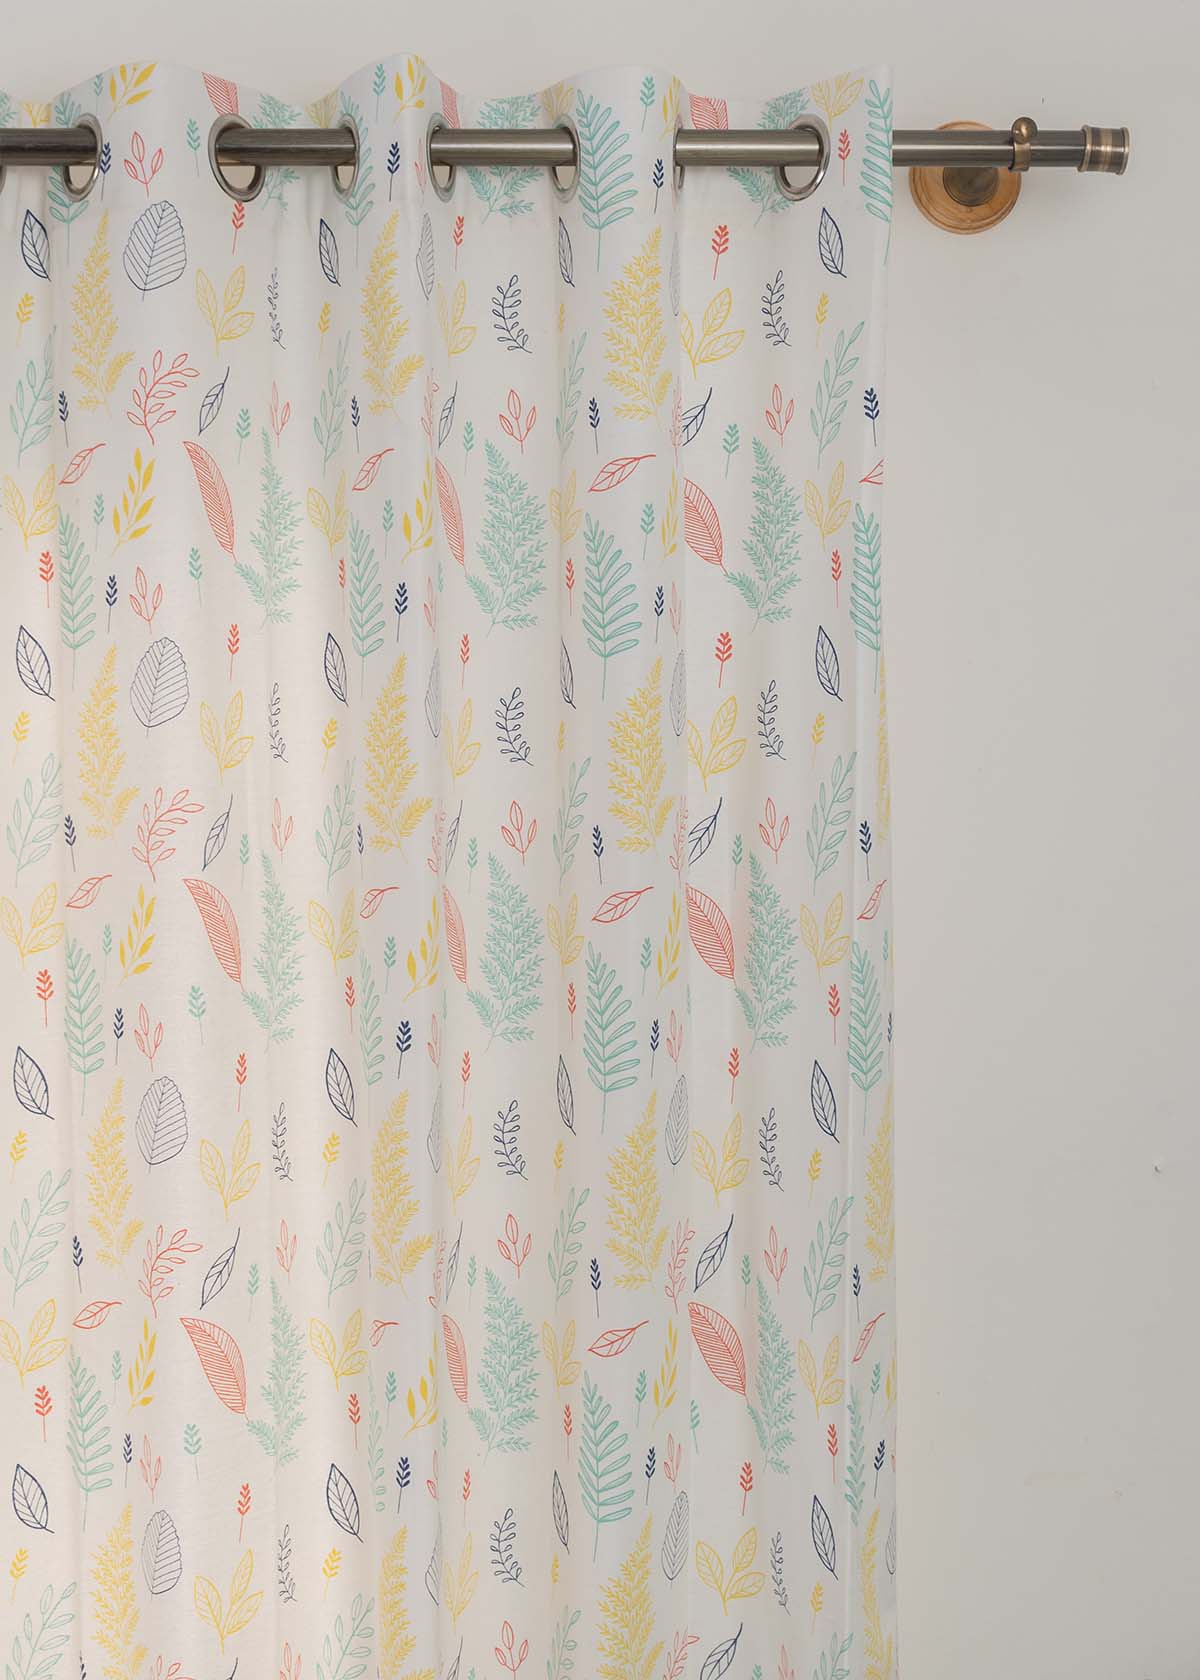 Rustling Leaves Printed Cotton Curtain - Multicolor